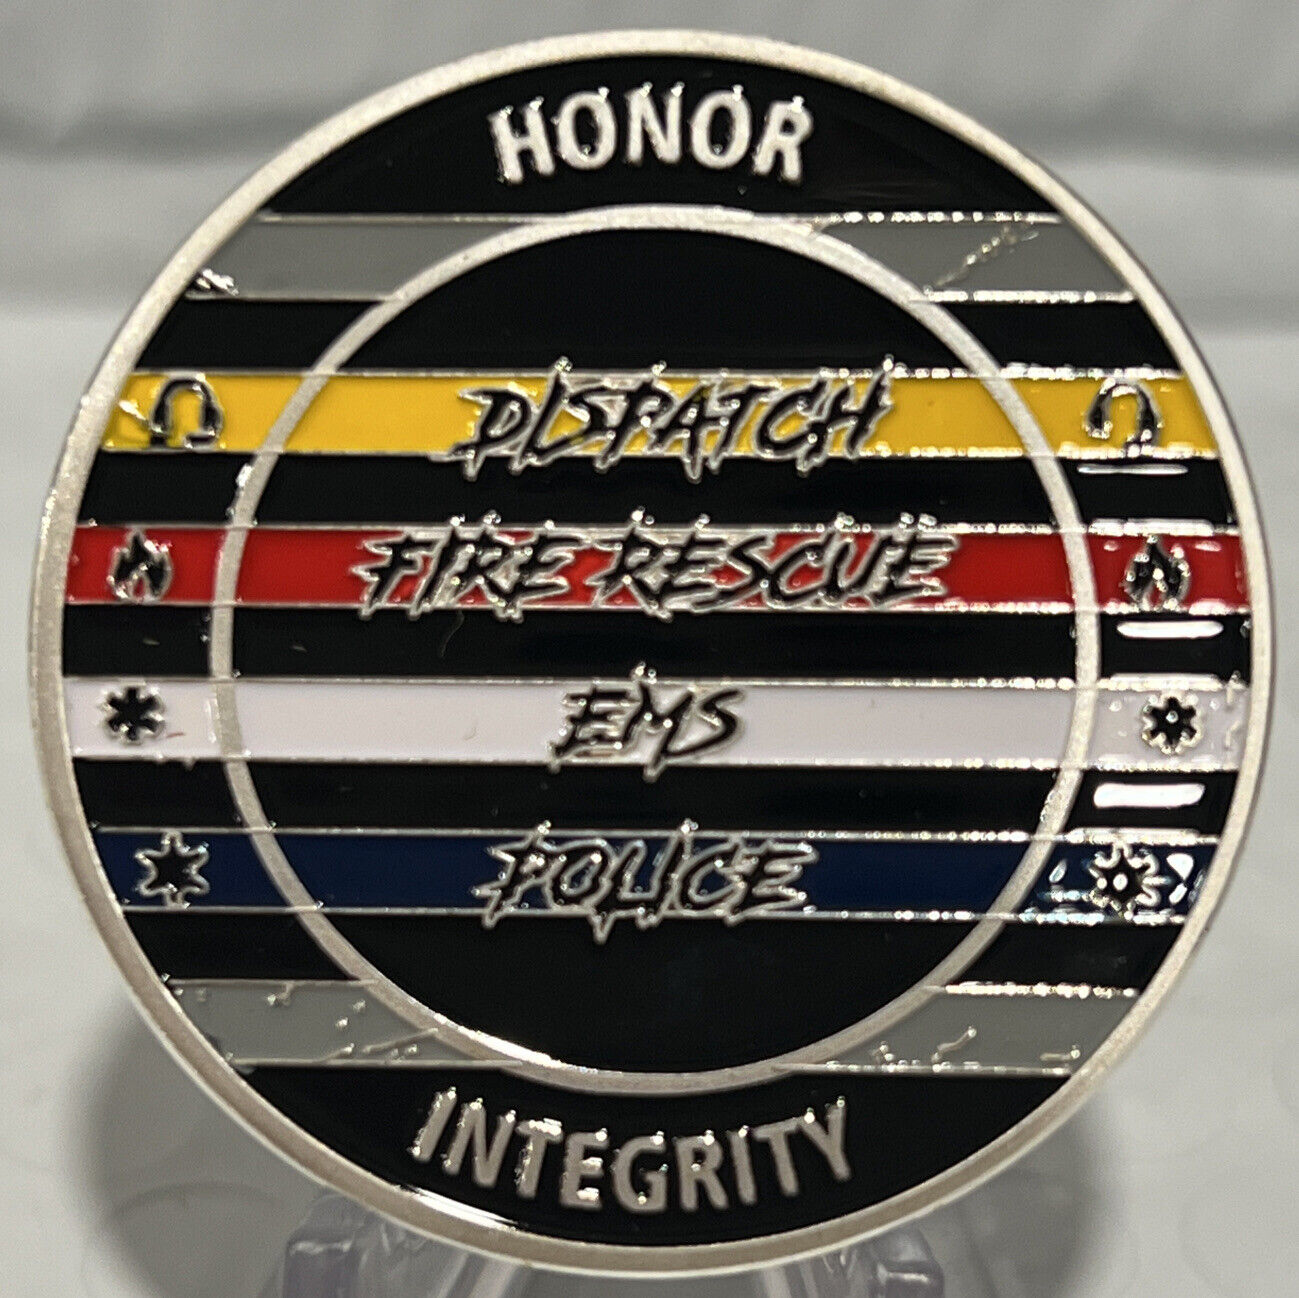 * Dispatch Fire EMT EMS Police Challenge Coin Honor Integrity Rescue Silver Trim